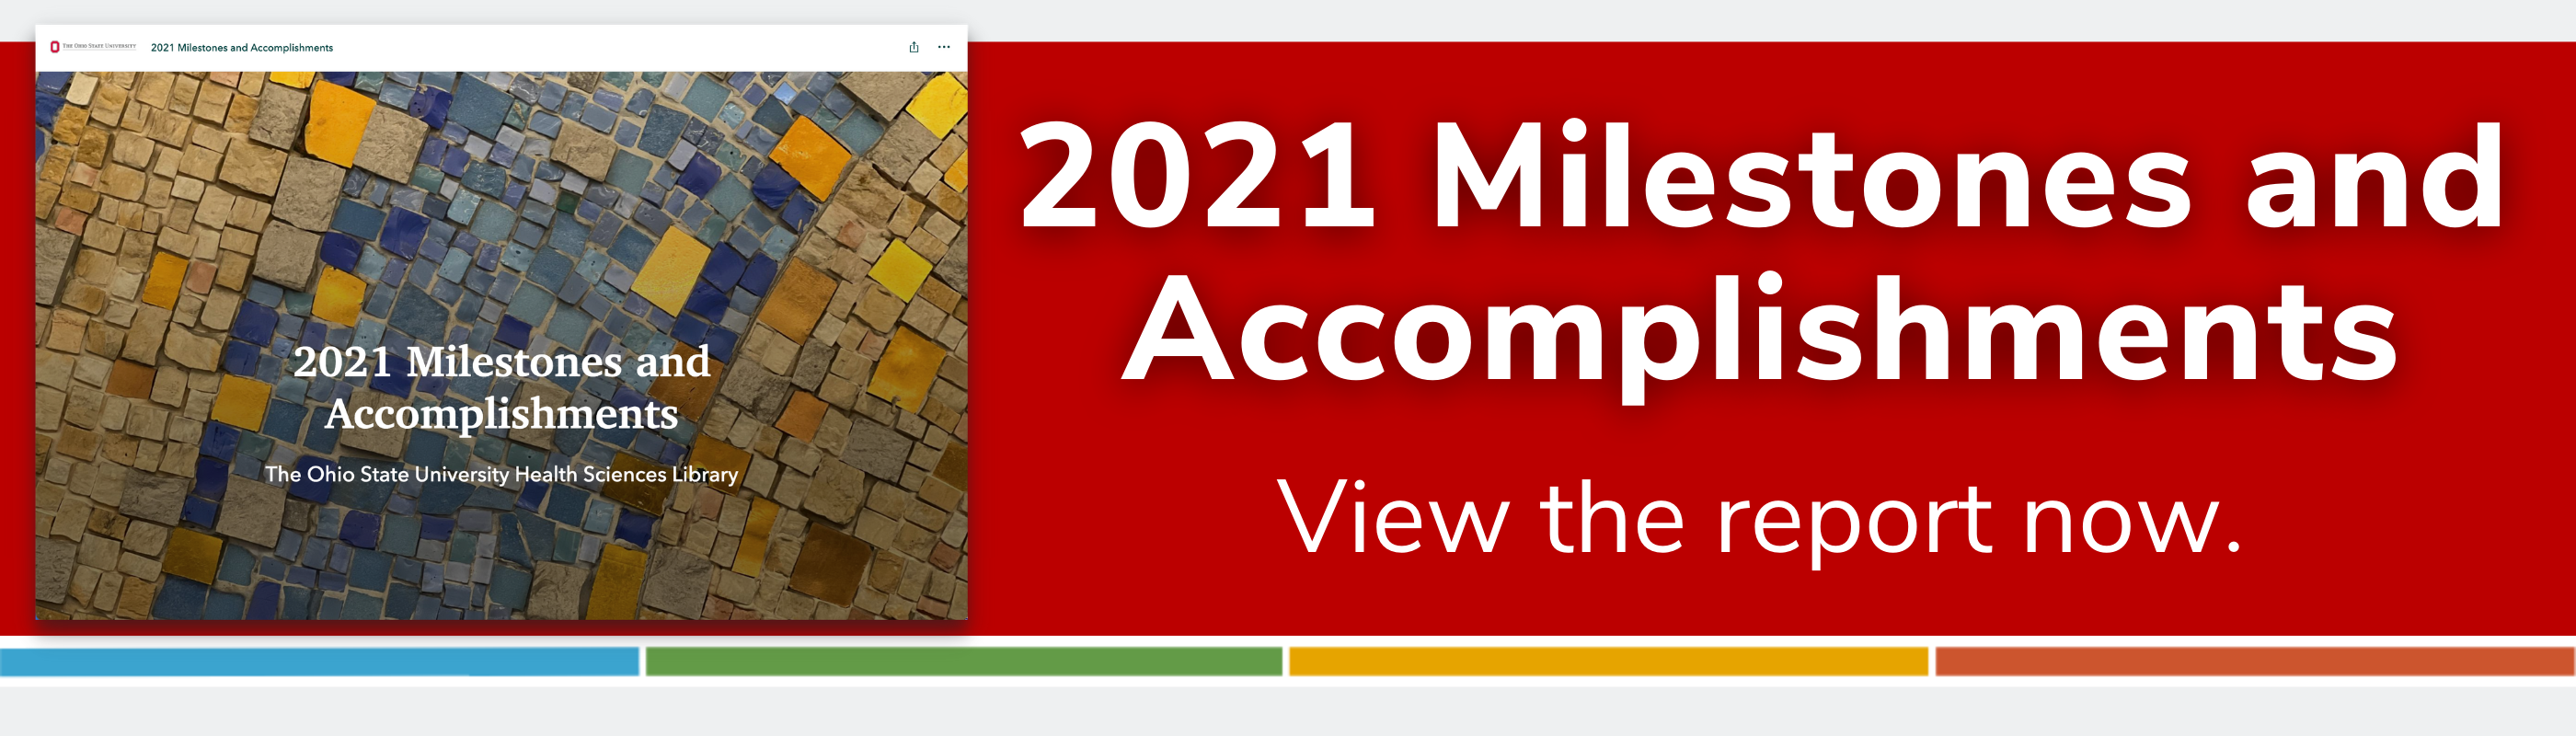 Click the banner to view the HSL's 2021 Milestones and Accomplishments report.